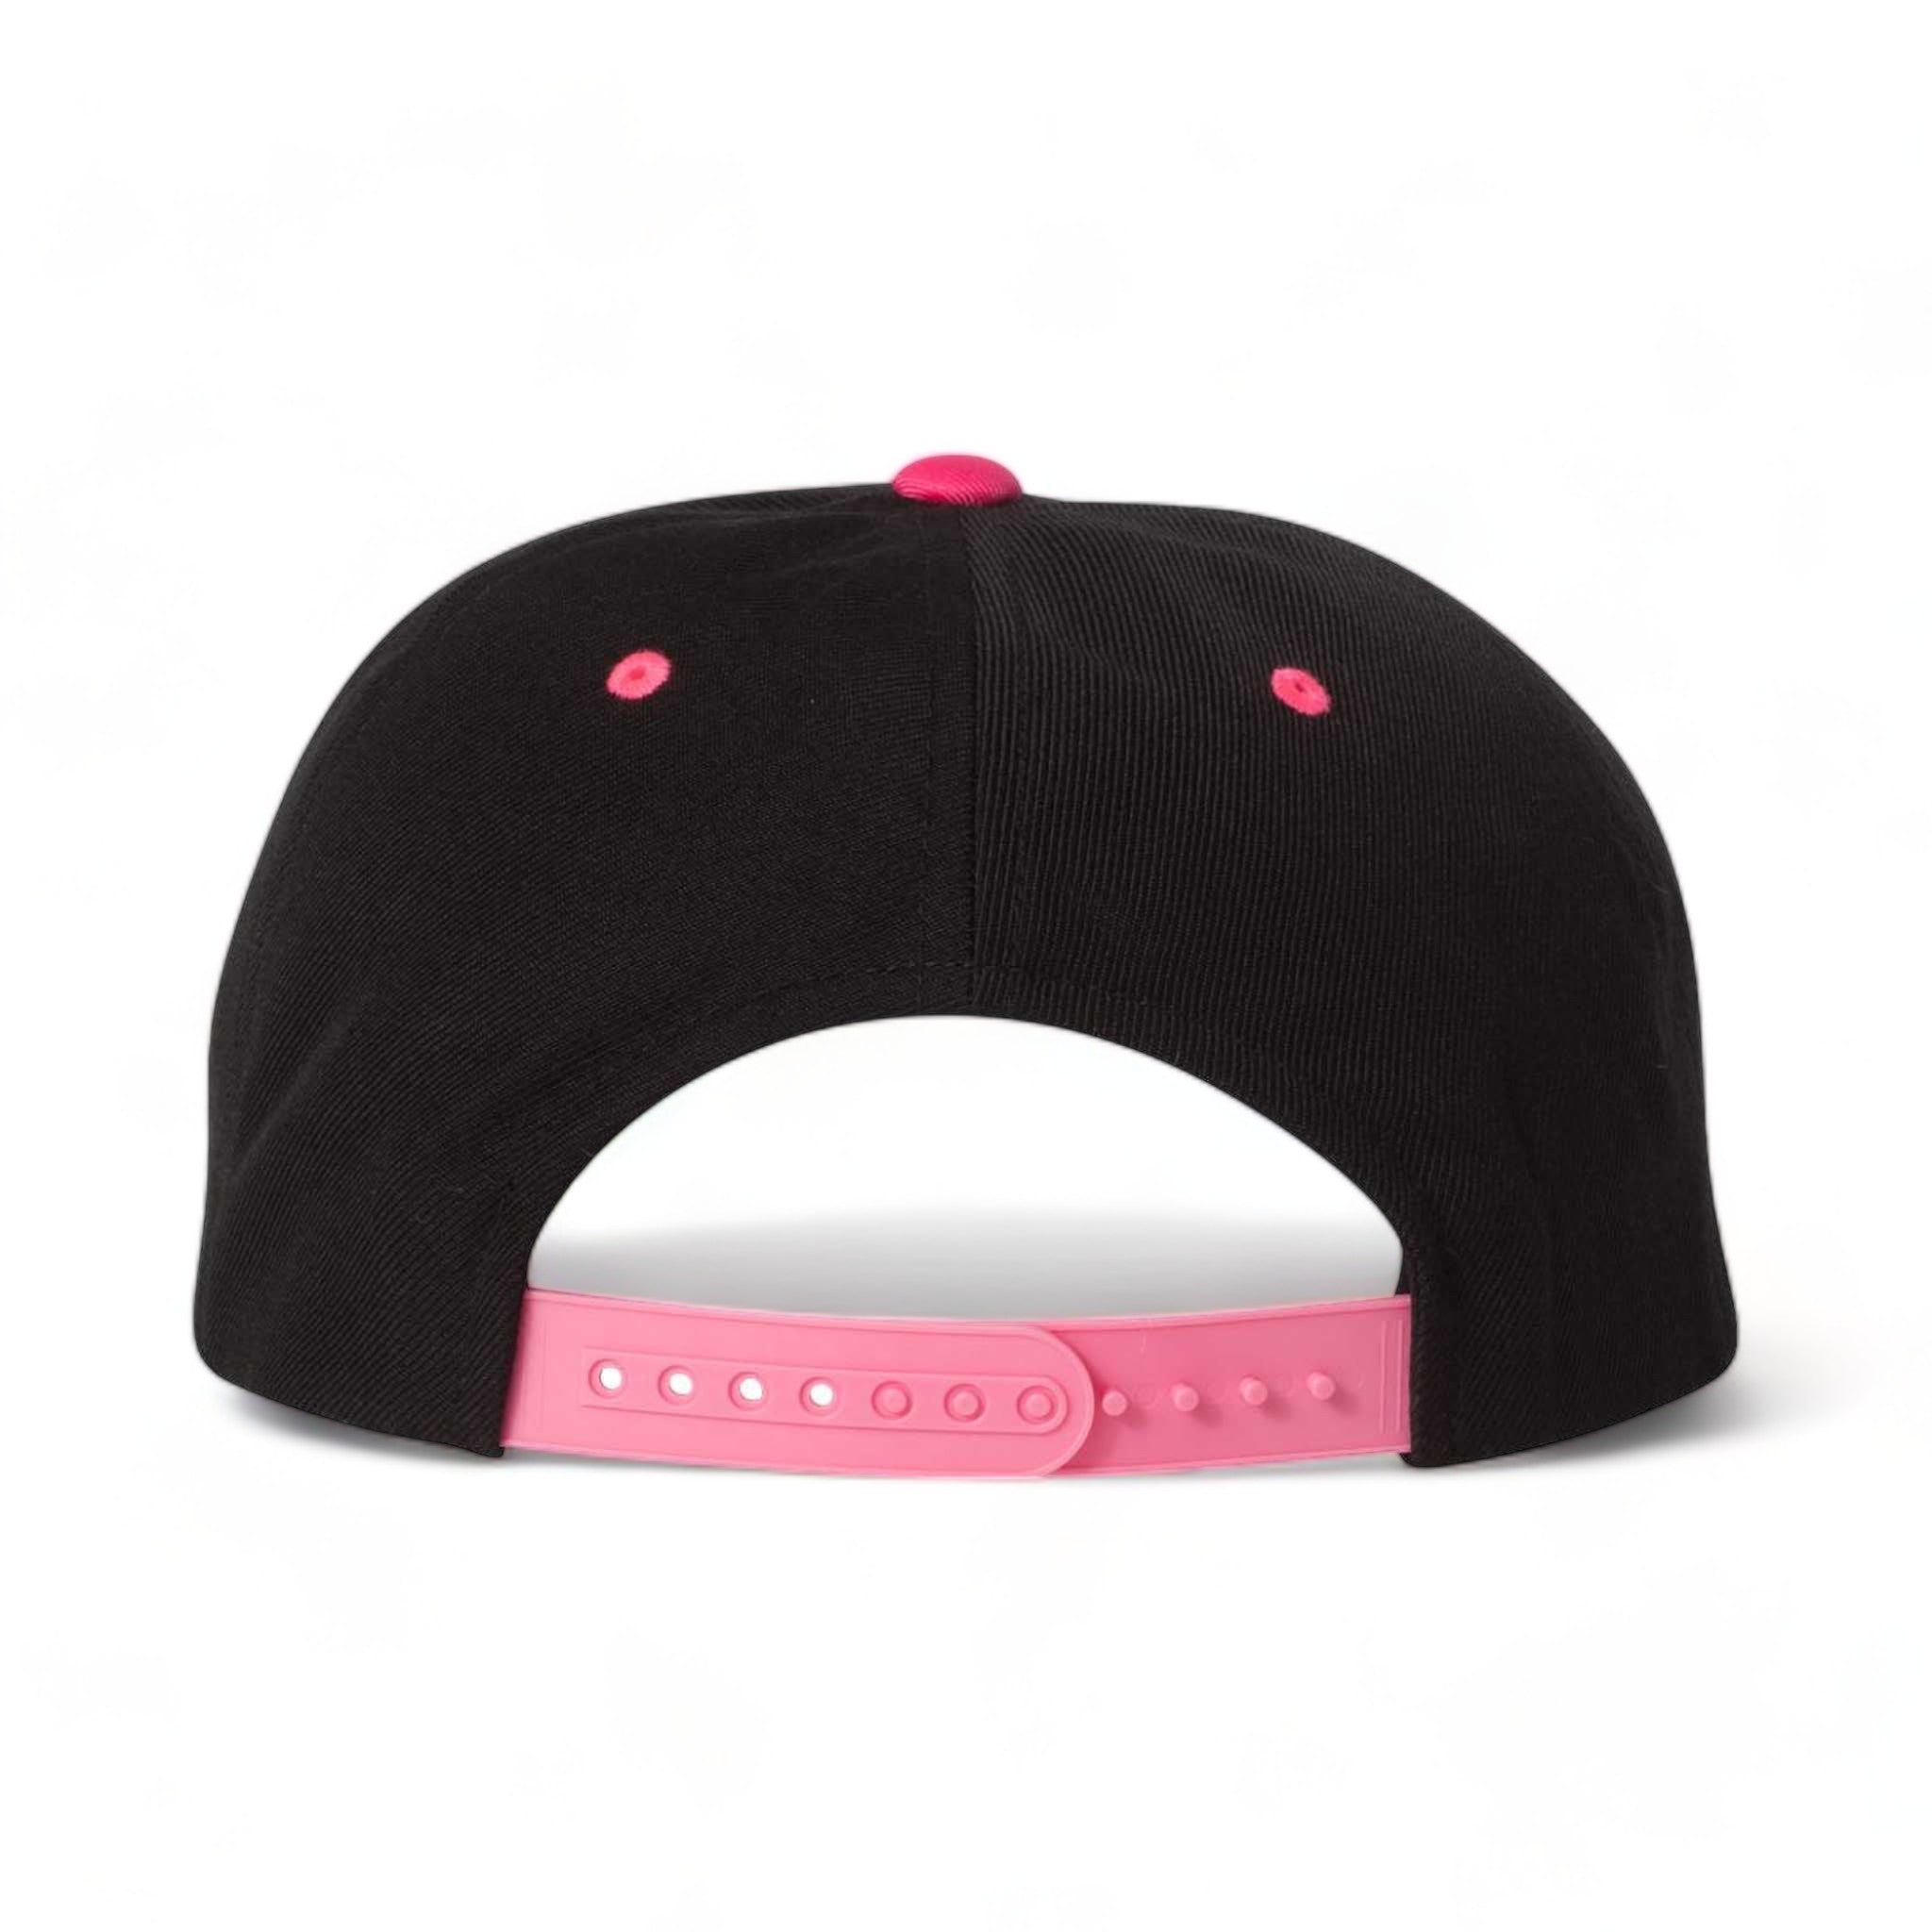 Back view of YP Classics 6089M custom hat in black and neon pink